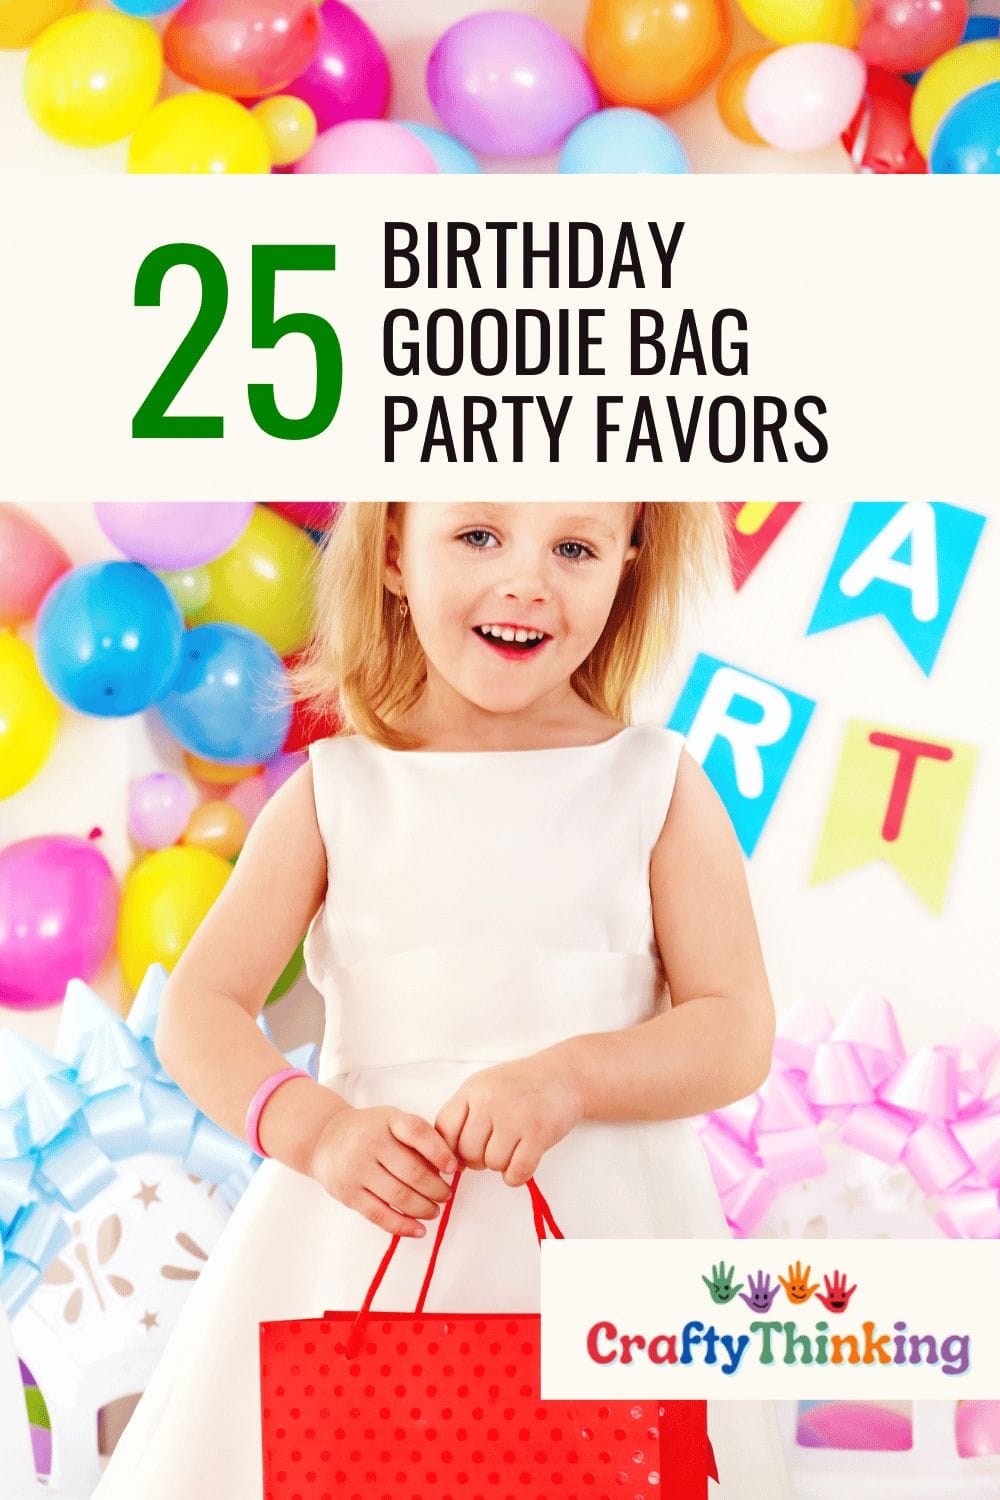 25 Best Birthday Party Goodie Bag Ideas: DIY Birthday Party Favors ...